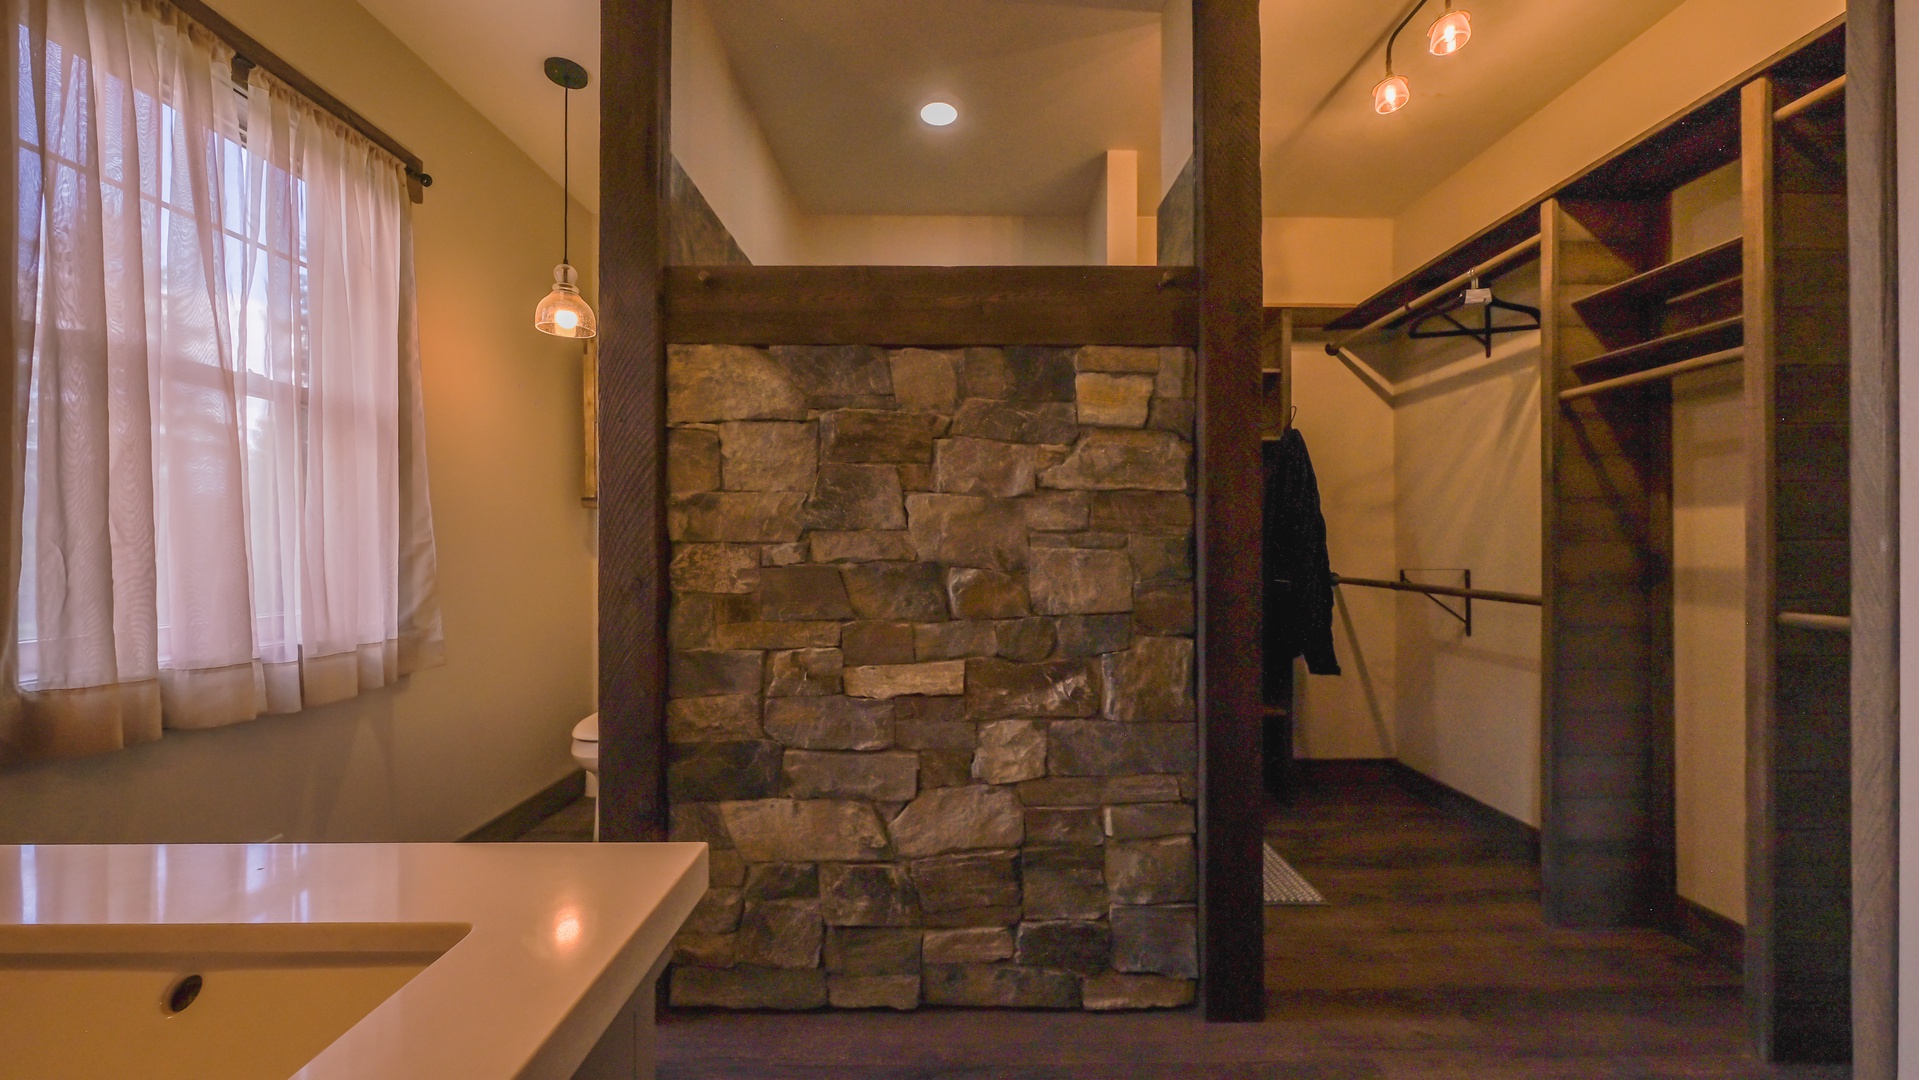 Ensuite bathroom with stunning stonework, dual sinks and stand-up shower